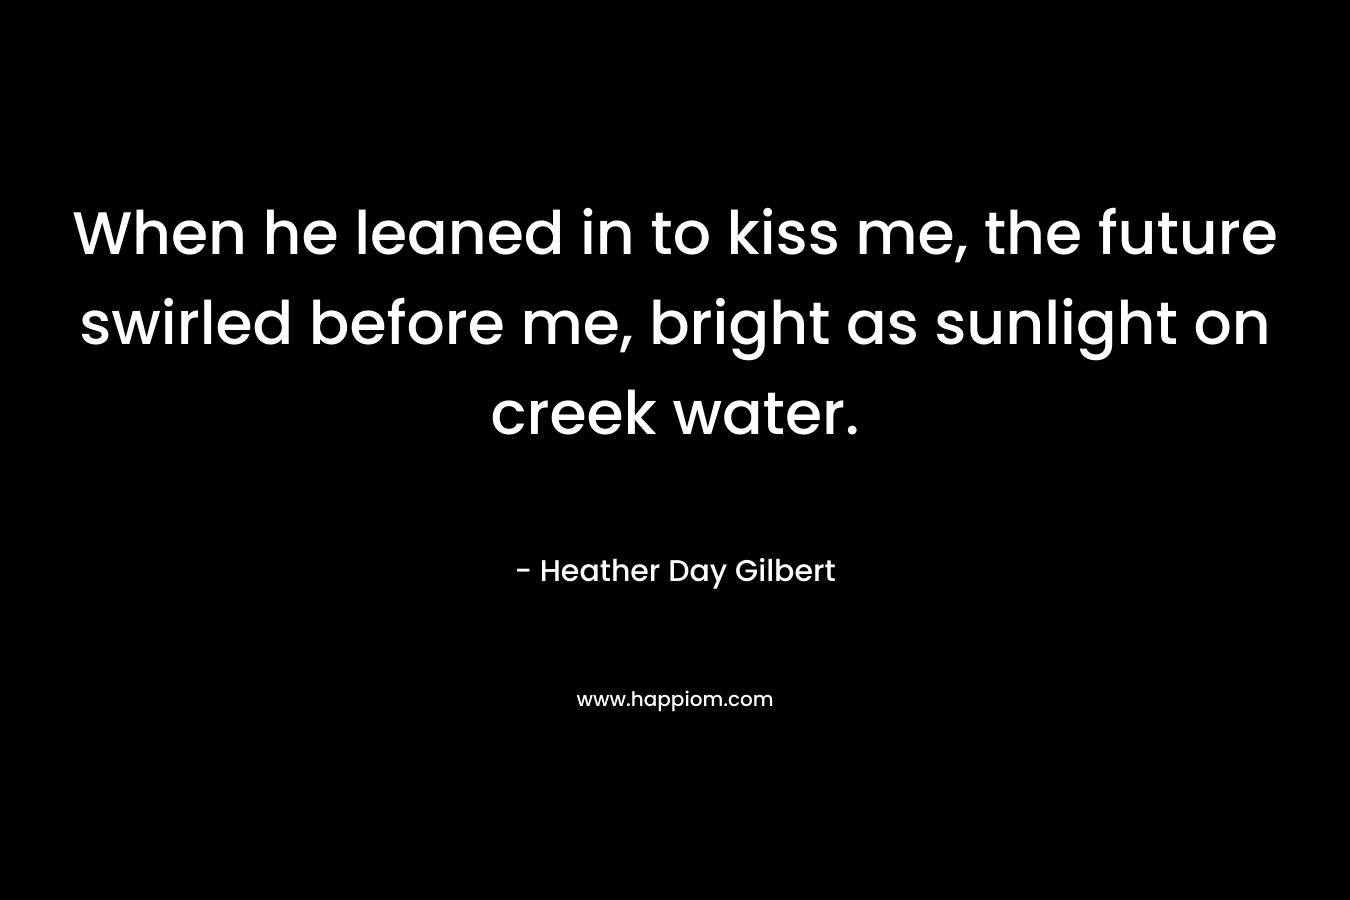 When he leaned in to kiss me, the future swirled before me, bright as sunlight on creek water. – Heather Day Gilbert